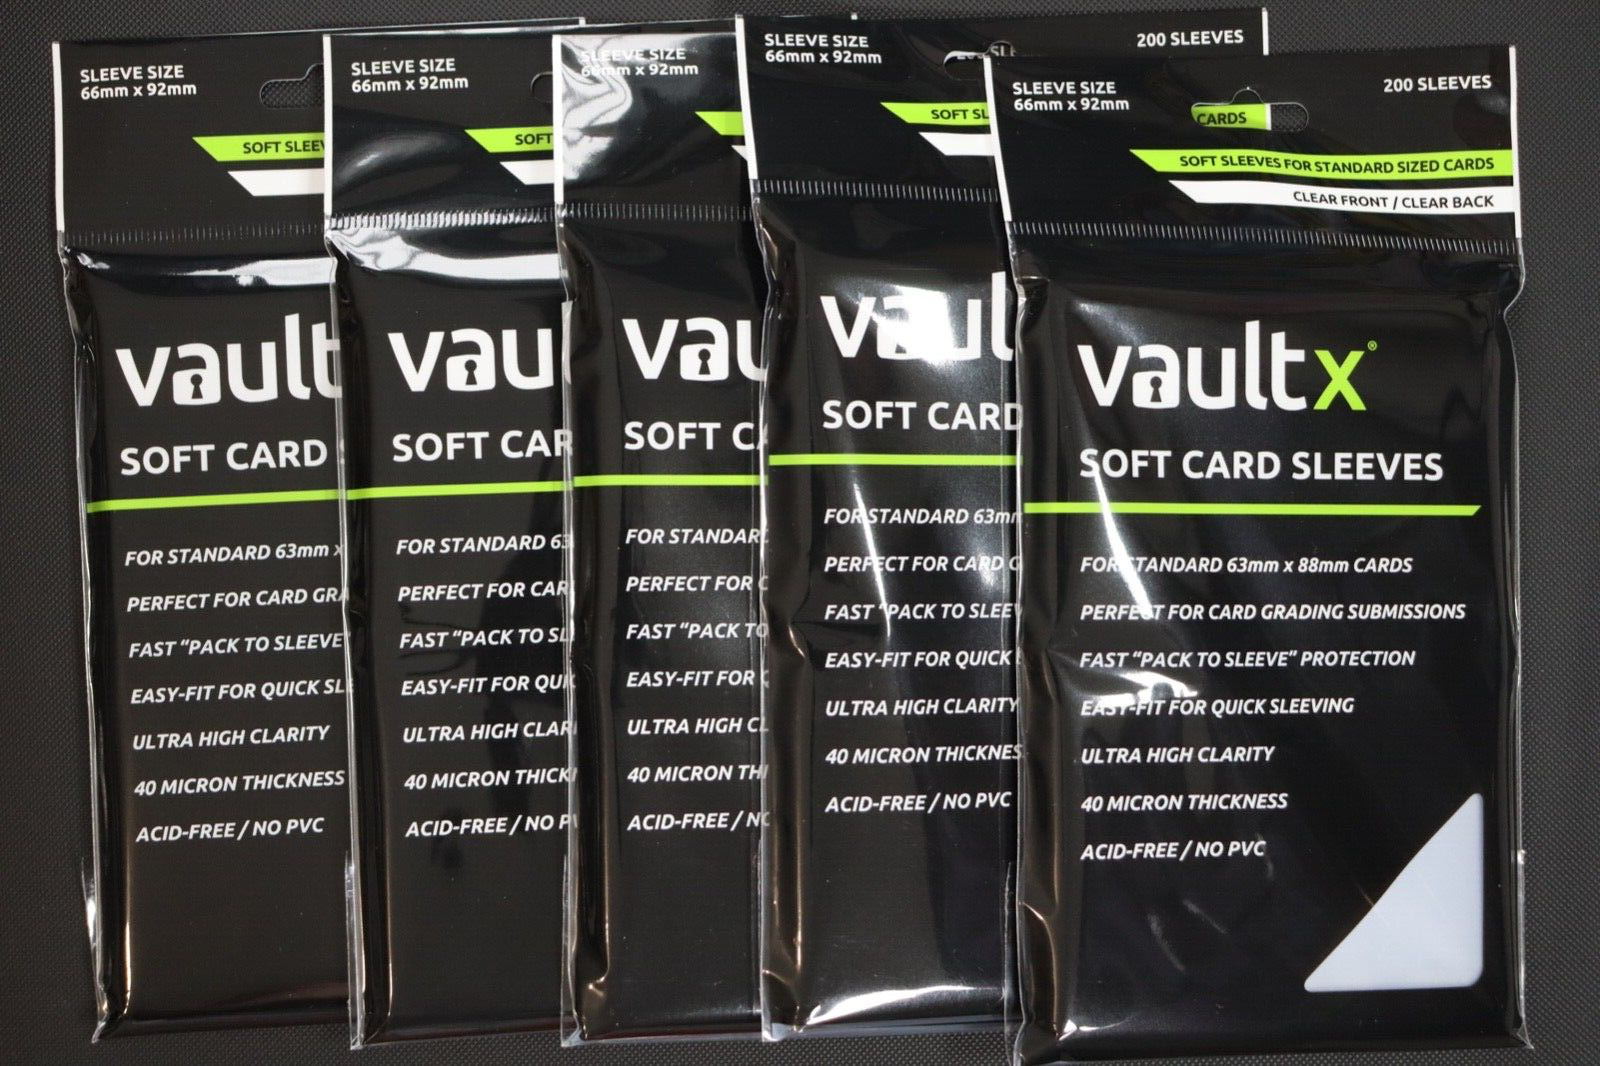 Vault X Soft Card Sleeves Fits Standard size cards pack of 5 1000 sleeves total